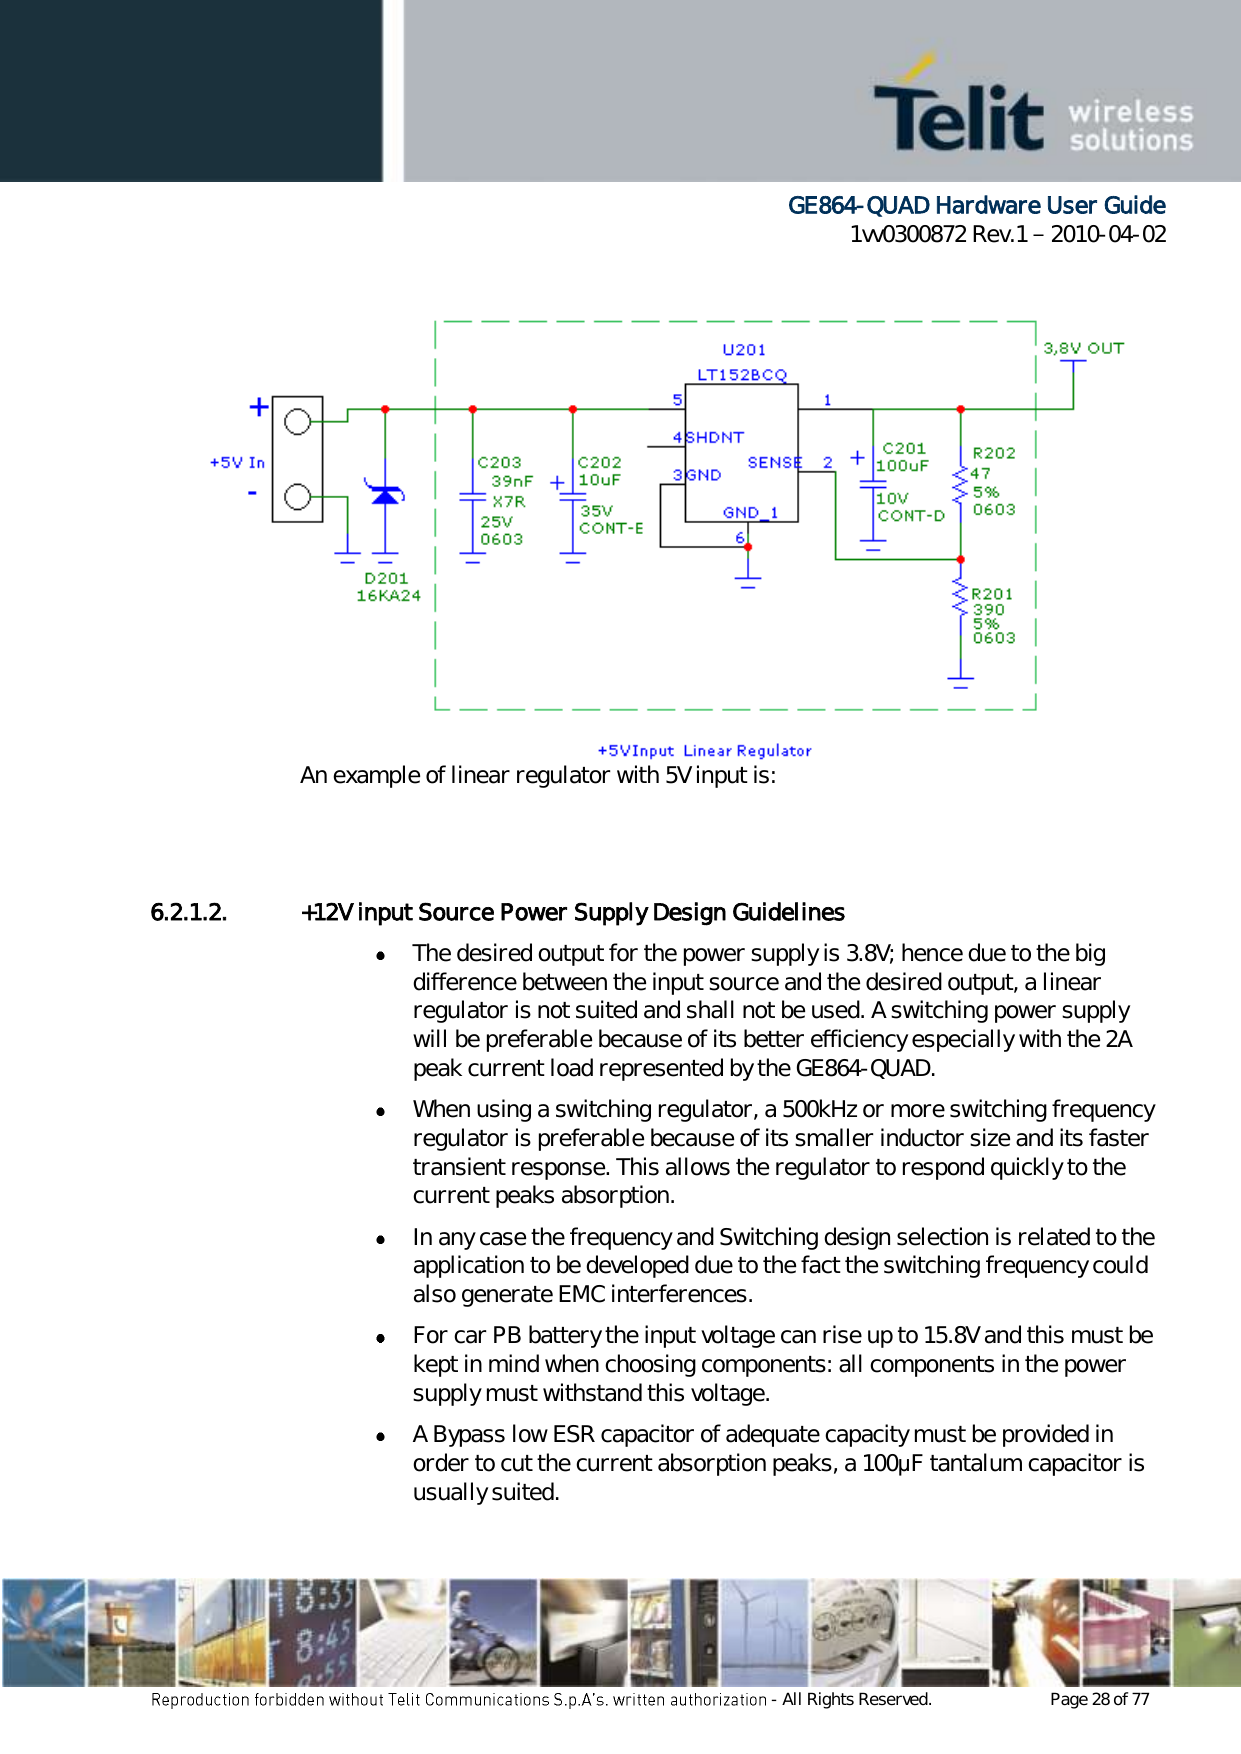      GE864-QUAD Hardware User Guide 1vv0300872 Rev.1   2010-04-02 - All Rights Reserved.    Page 28 of 77  An example of linear regulator with 5V input is:   6.2.1.2. +12V input Source Power Supply Design Guidelines  The desired output for the power supply is 3.8V; hence due to the big difference between the input source and the desired output, a linear regulator is not suited and shall not be used. A switching power supply will be preferable because of its better efficiency especially with the 2A peak current load represented by the GE864-QUAD.  When using a switching regulator, a 500kHz or more switching frequency regulator is preferable because of its smaller inductor size and its faster transient response. This allows the regulator to respond quickly to the current peaks absorption.   In any case the frequency and Switching design selection is related to the application to be developed due to the fact the switching frequency could also generate EMC interferences.  For car PB battery the input voltage can rise up to 15.8V and this must be kept in mind when choosing components: all components in the power supply must withstand this voltage.  A Bypass low ESR capacitor of adequate capacity must be provided in order to cut the current absorption peaks, a 100μF tantalum capacitor is usually suited. 